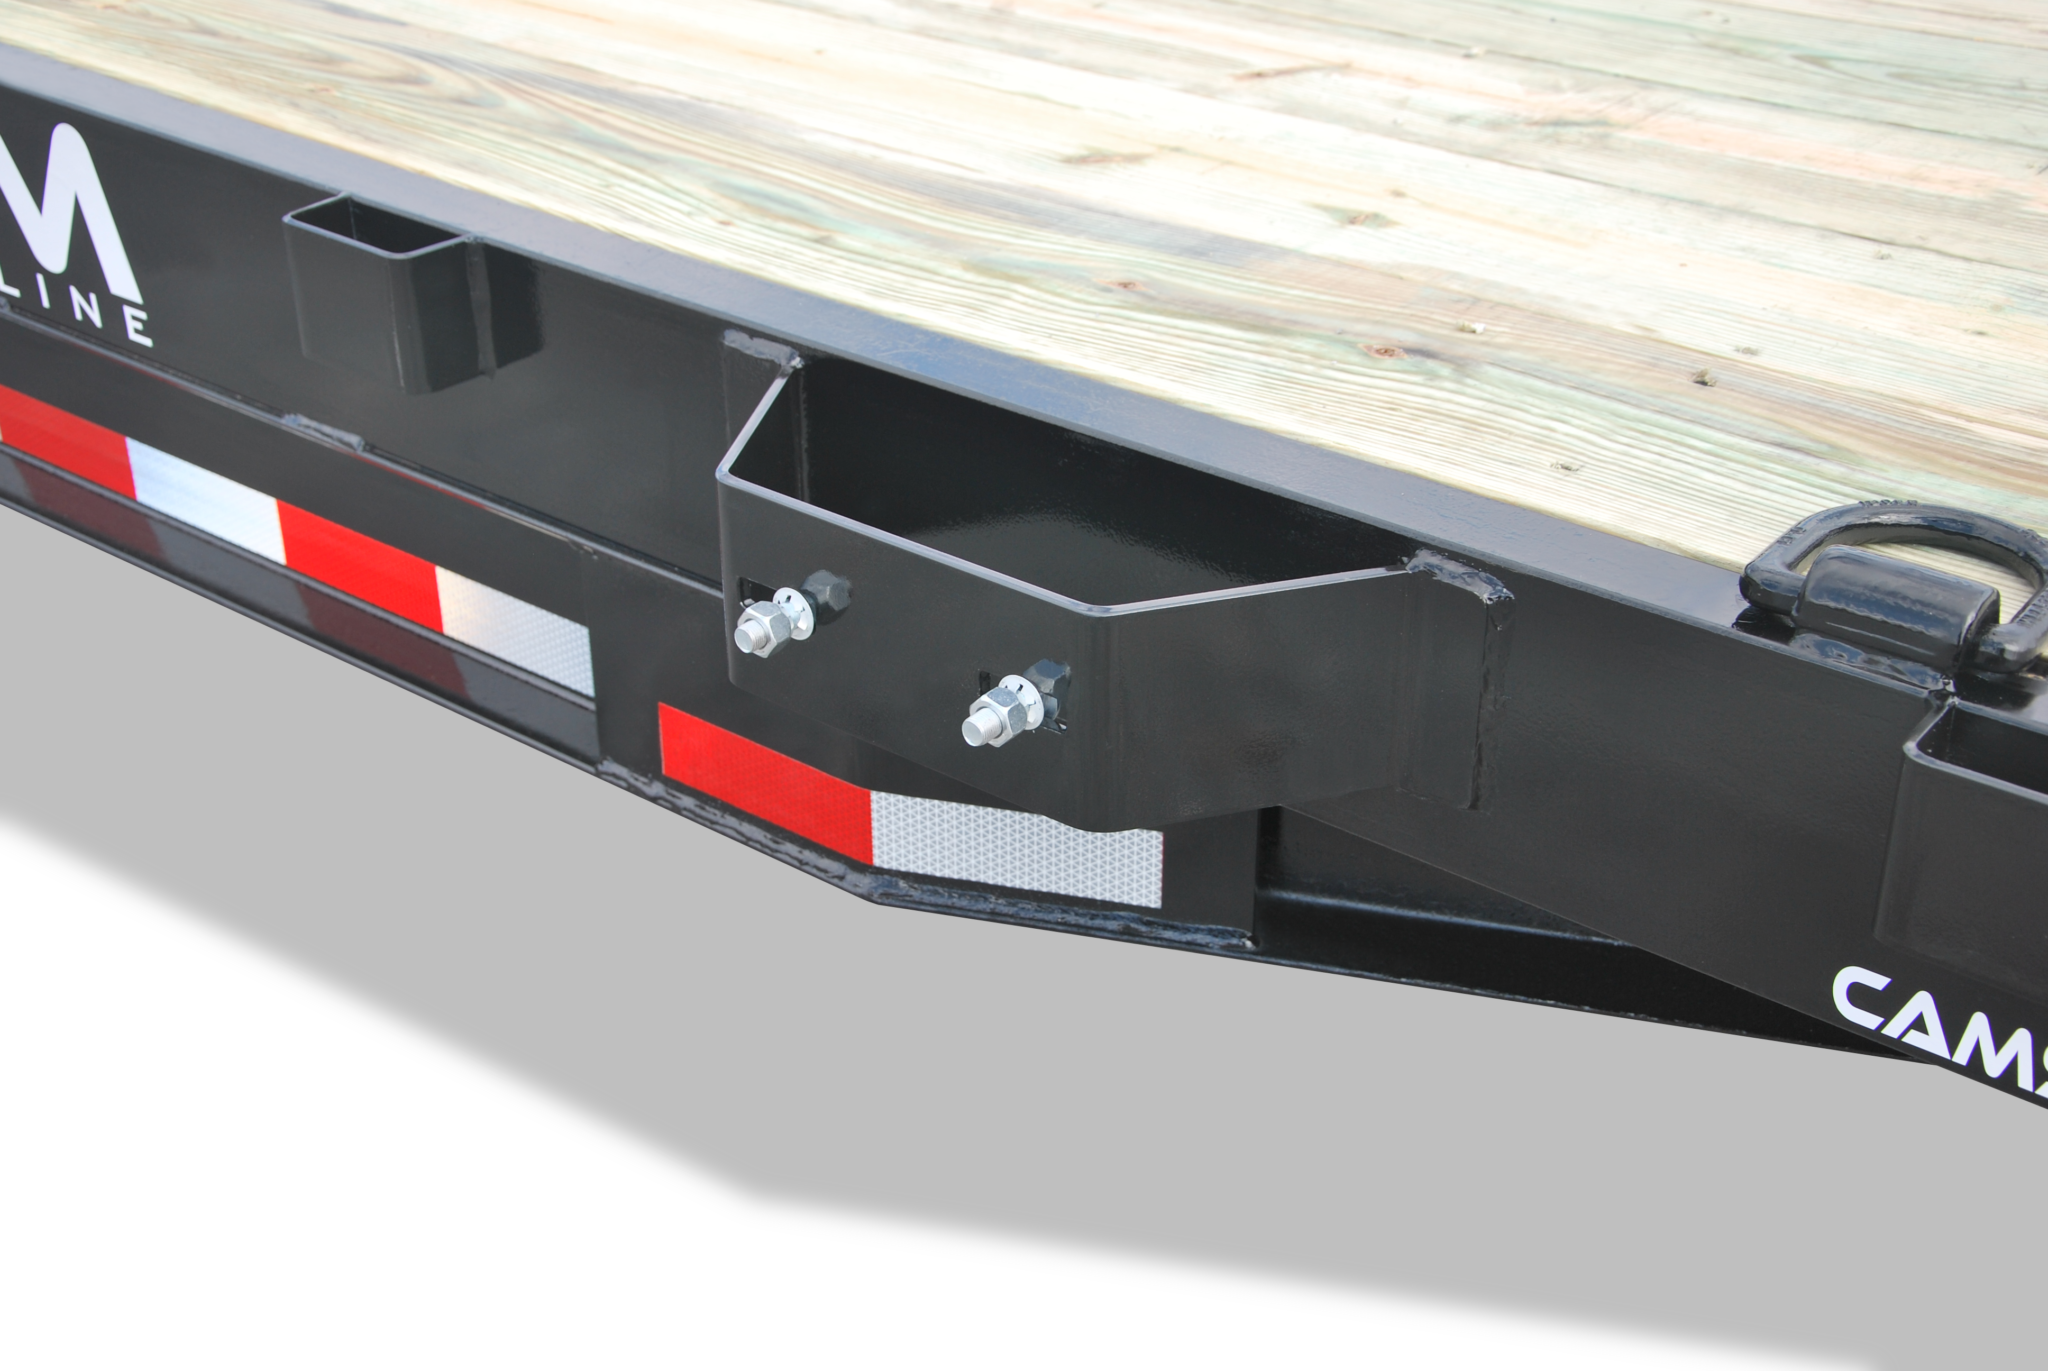 Cam Superline | Channel Frame with Beavertail Trailer | Image | Channel Frame Trailer with Beavertail and reflective tape, close-up of Spare Tire Mount